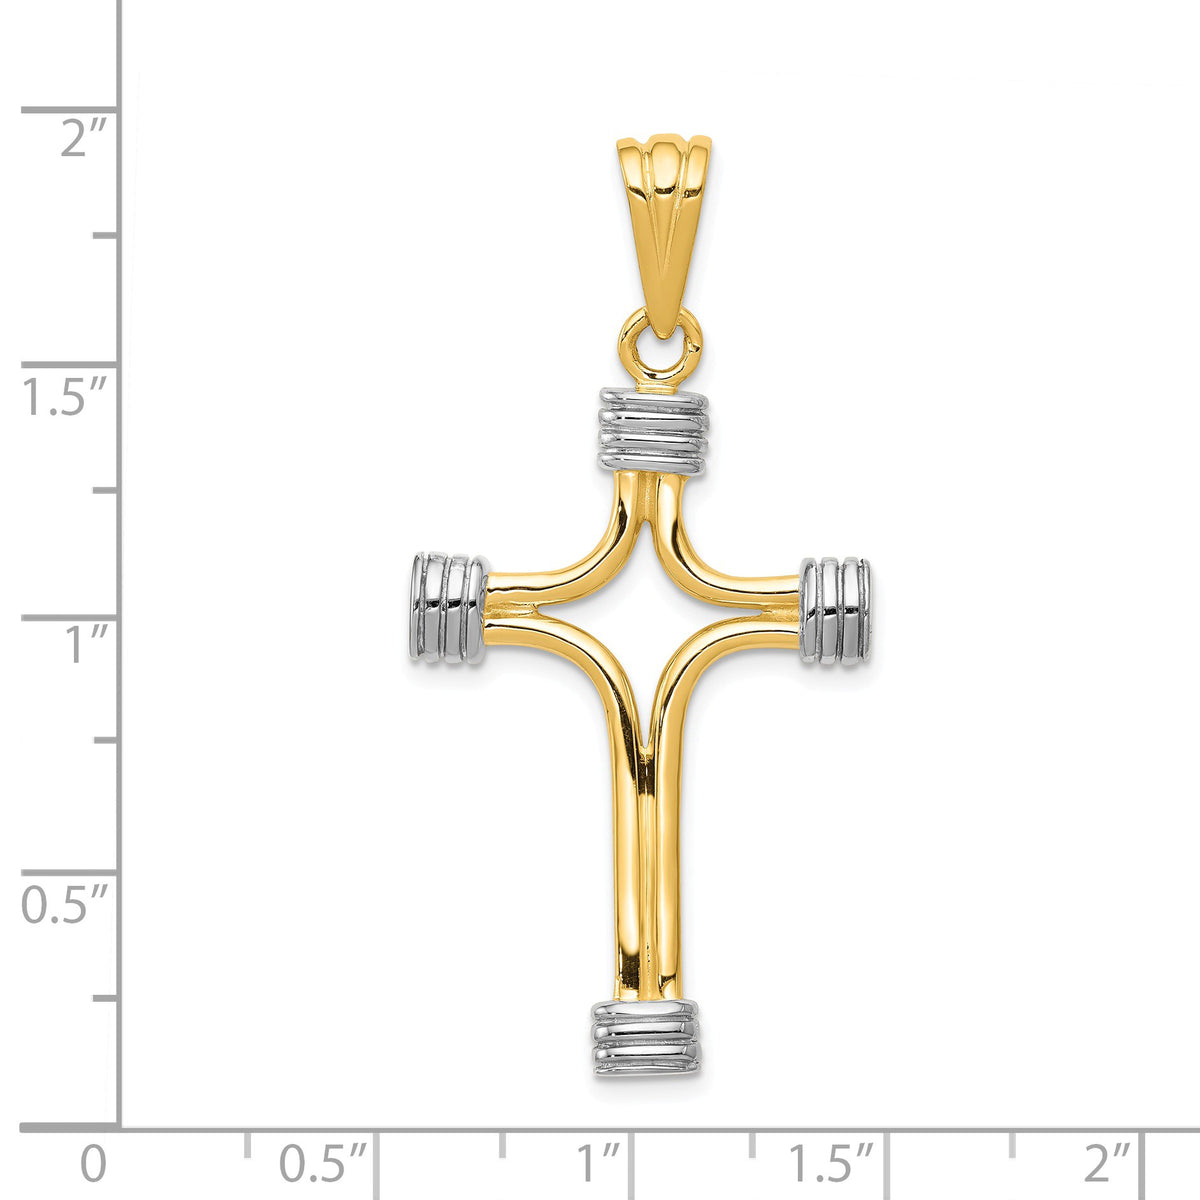 Alternate view of the 14k Yellow Gold and White Rhodium Polished Two Tone Cross Pendant by The Black Bow Jewelry Co.